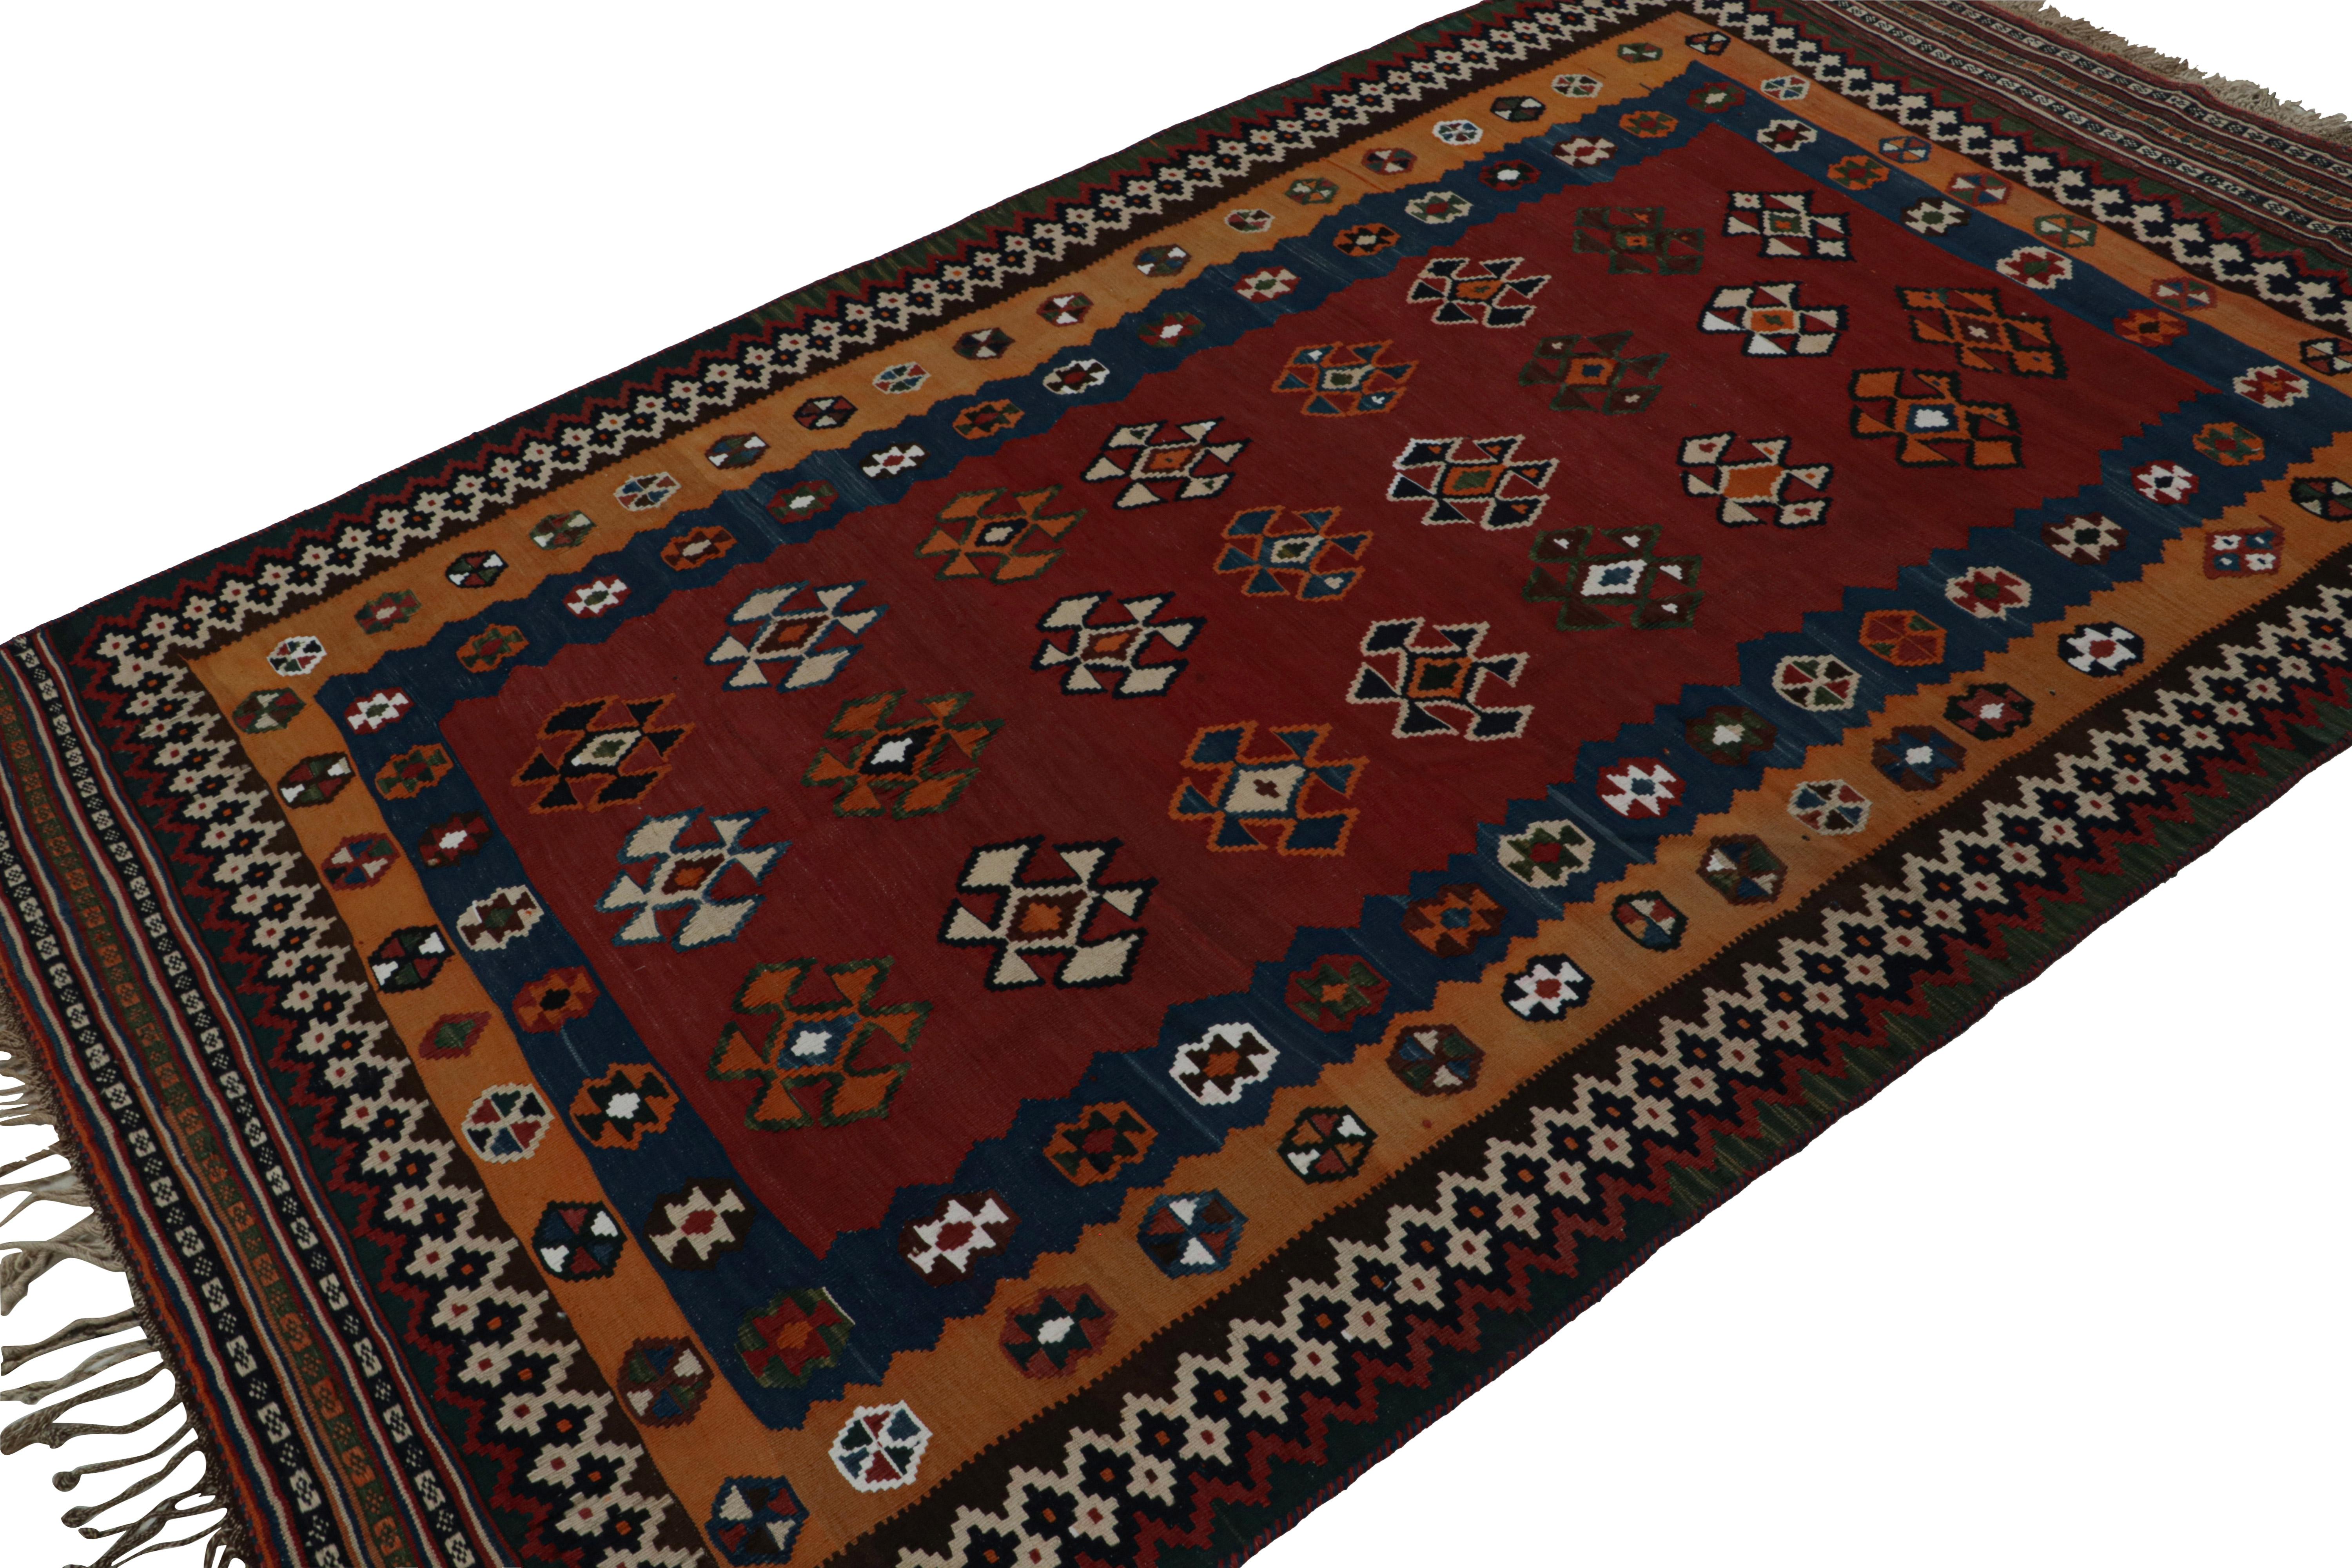 Handwoven in wool, circa 1950-1960, this 5x9 vintage Afghani tribal Kilim rug, with geometric patterns, is a special curation in the Rug & Kilim collection. 

On the design: 

A special curation in the Rug & Kilim collection, this rug showcases an